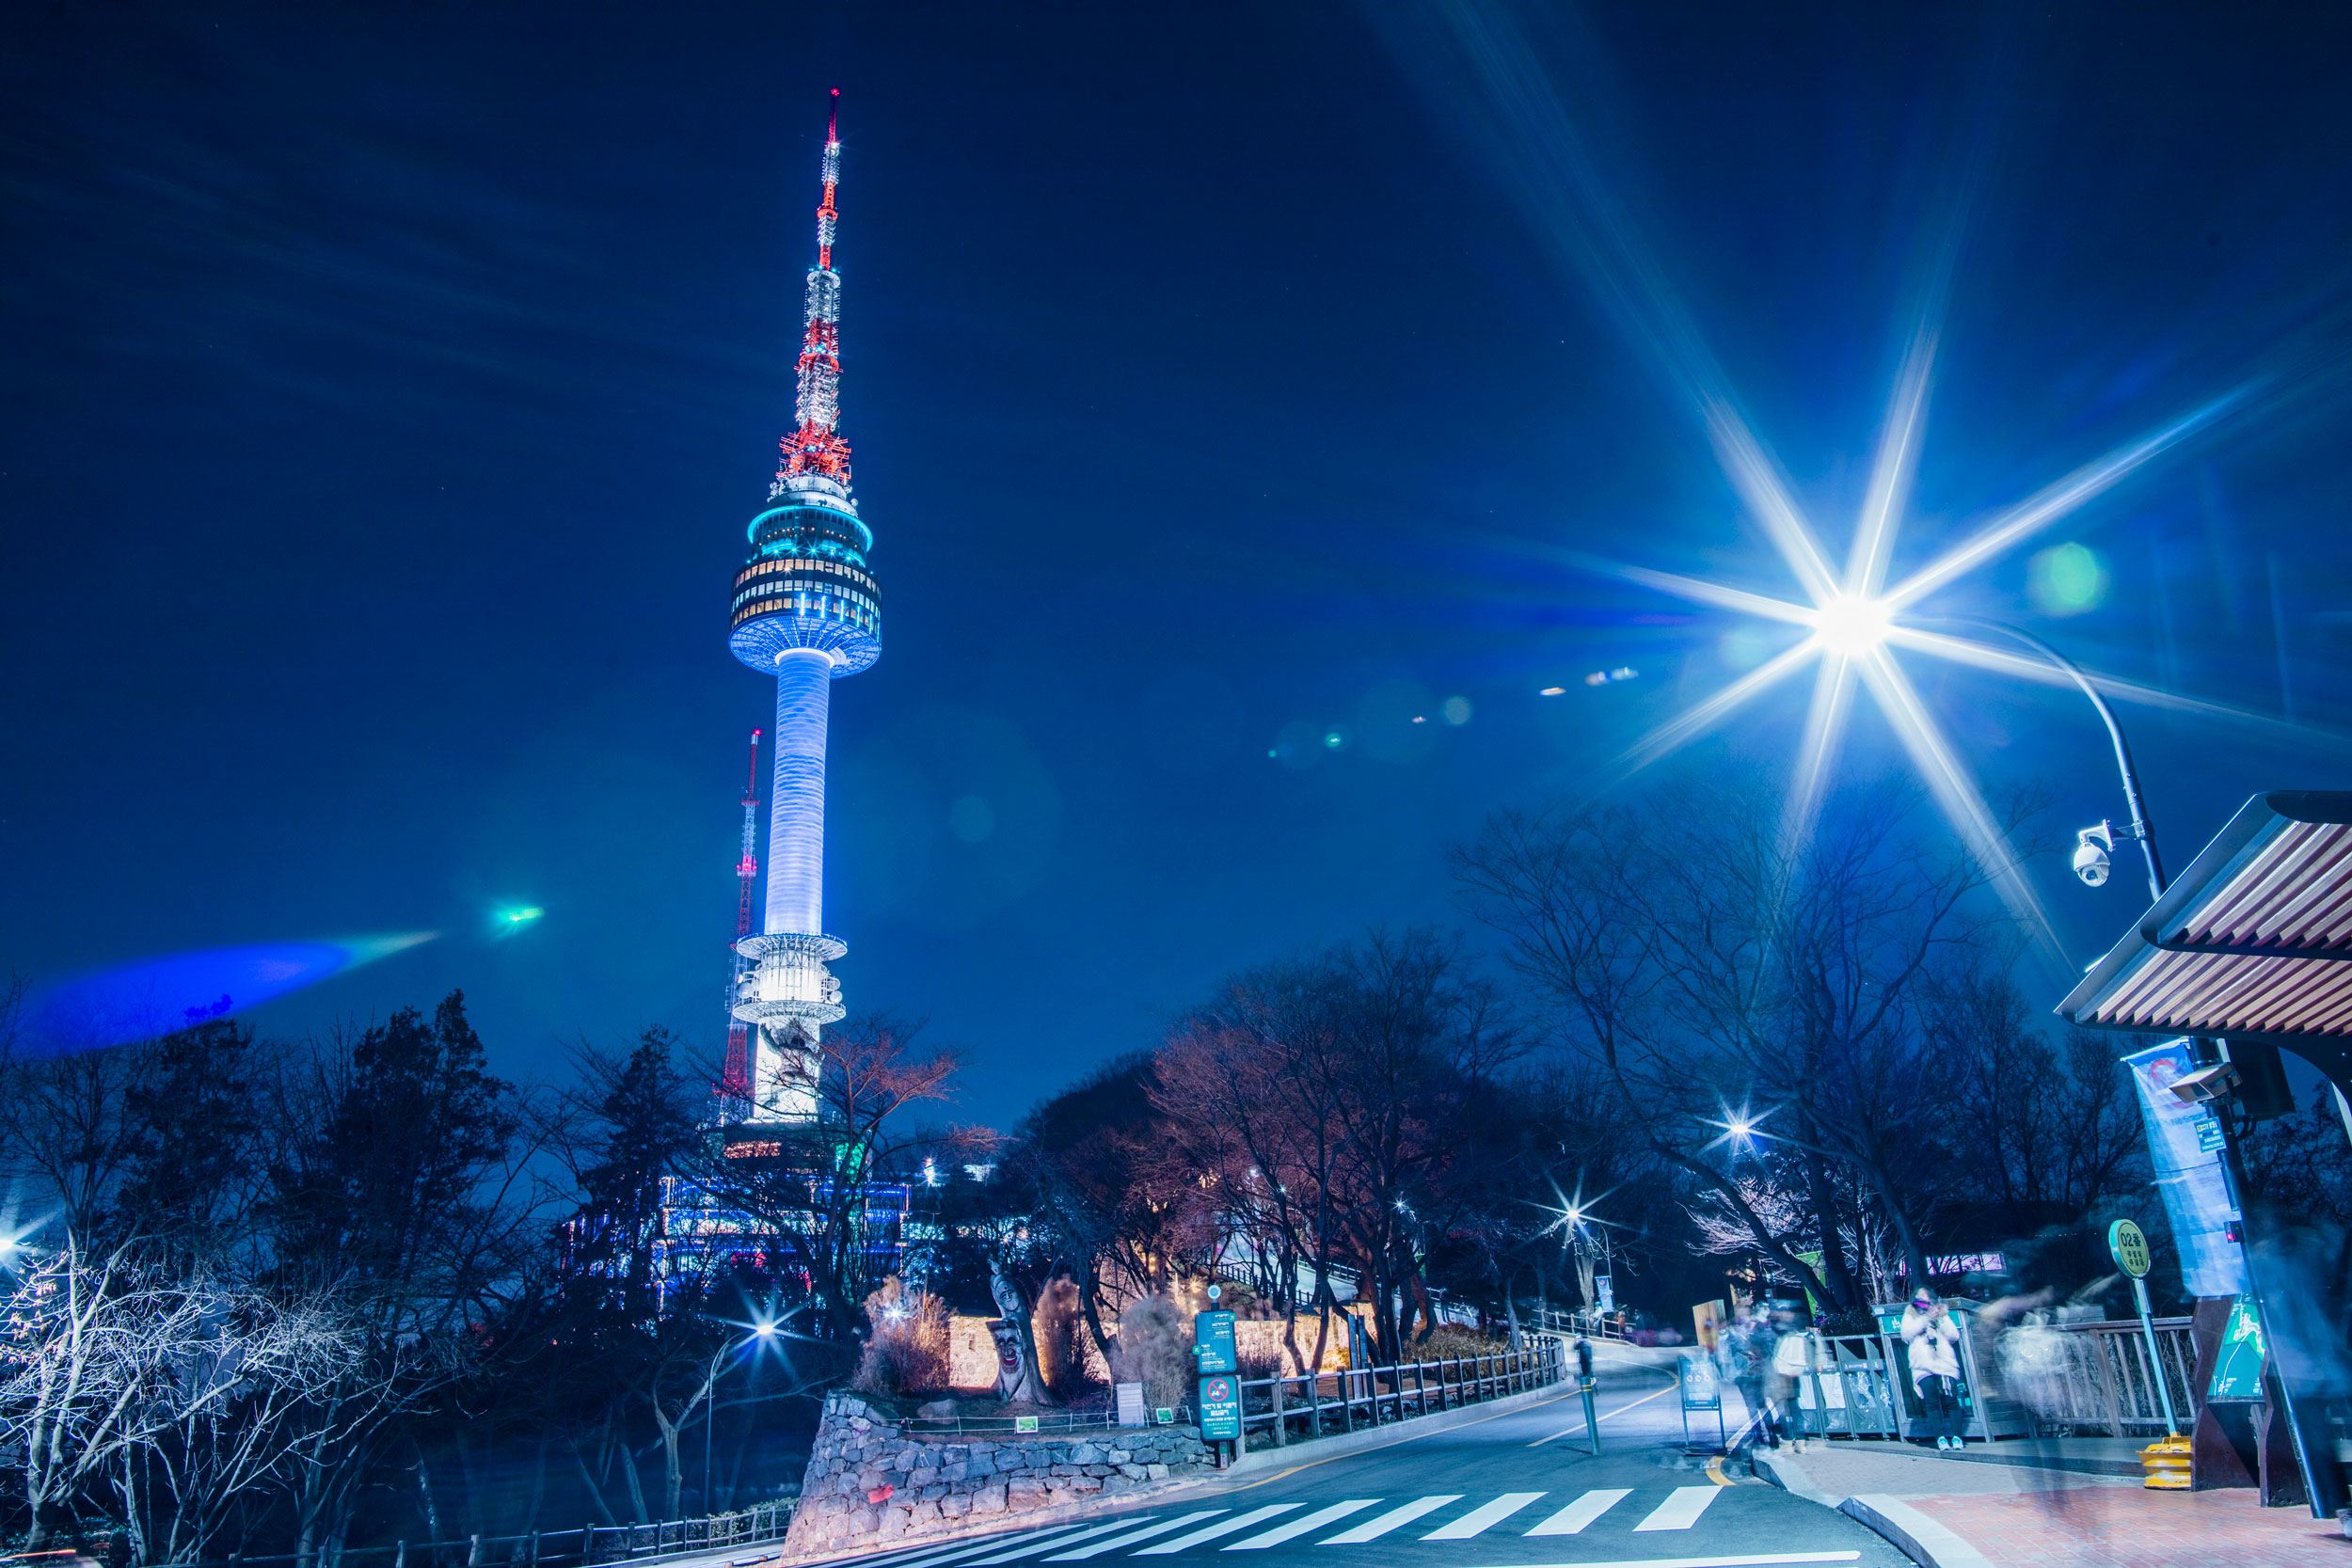 The Real Reason Why The N Seoul Tower Changes Color At Night - Koreaboo